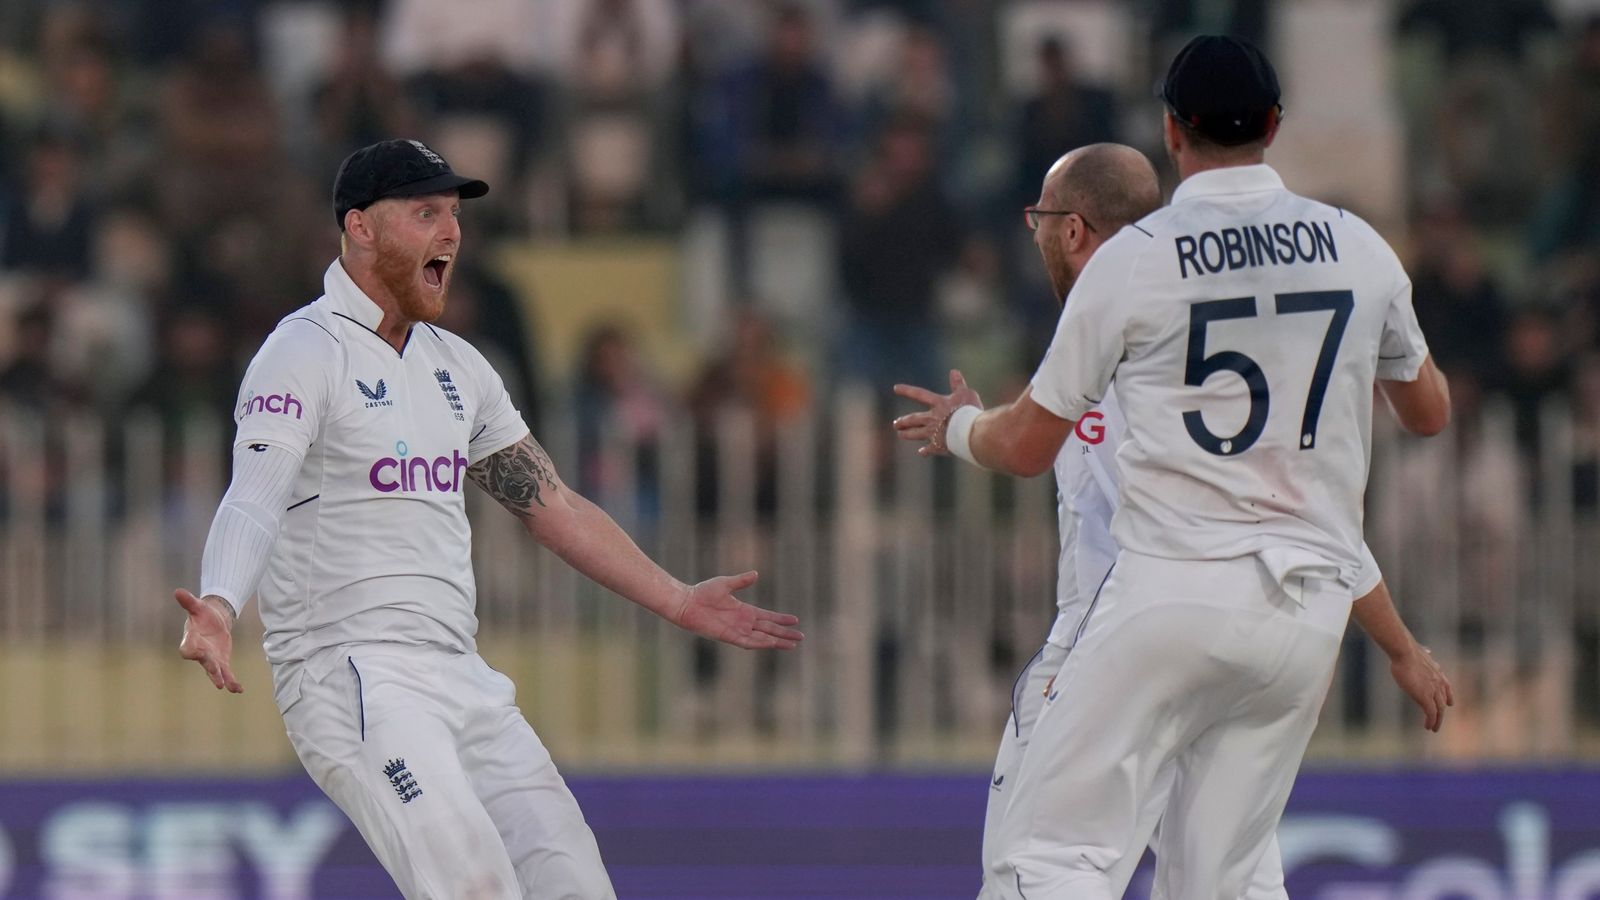 England’s cricketers record historic win by beating Pakistan by 74 runs in Rawalpindi